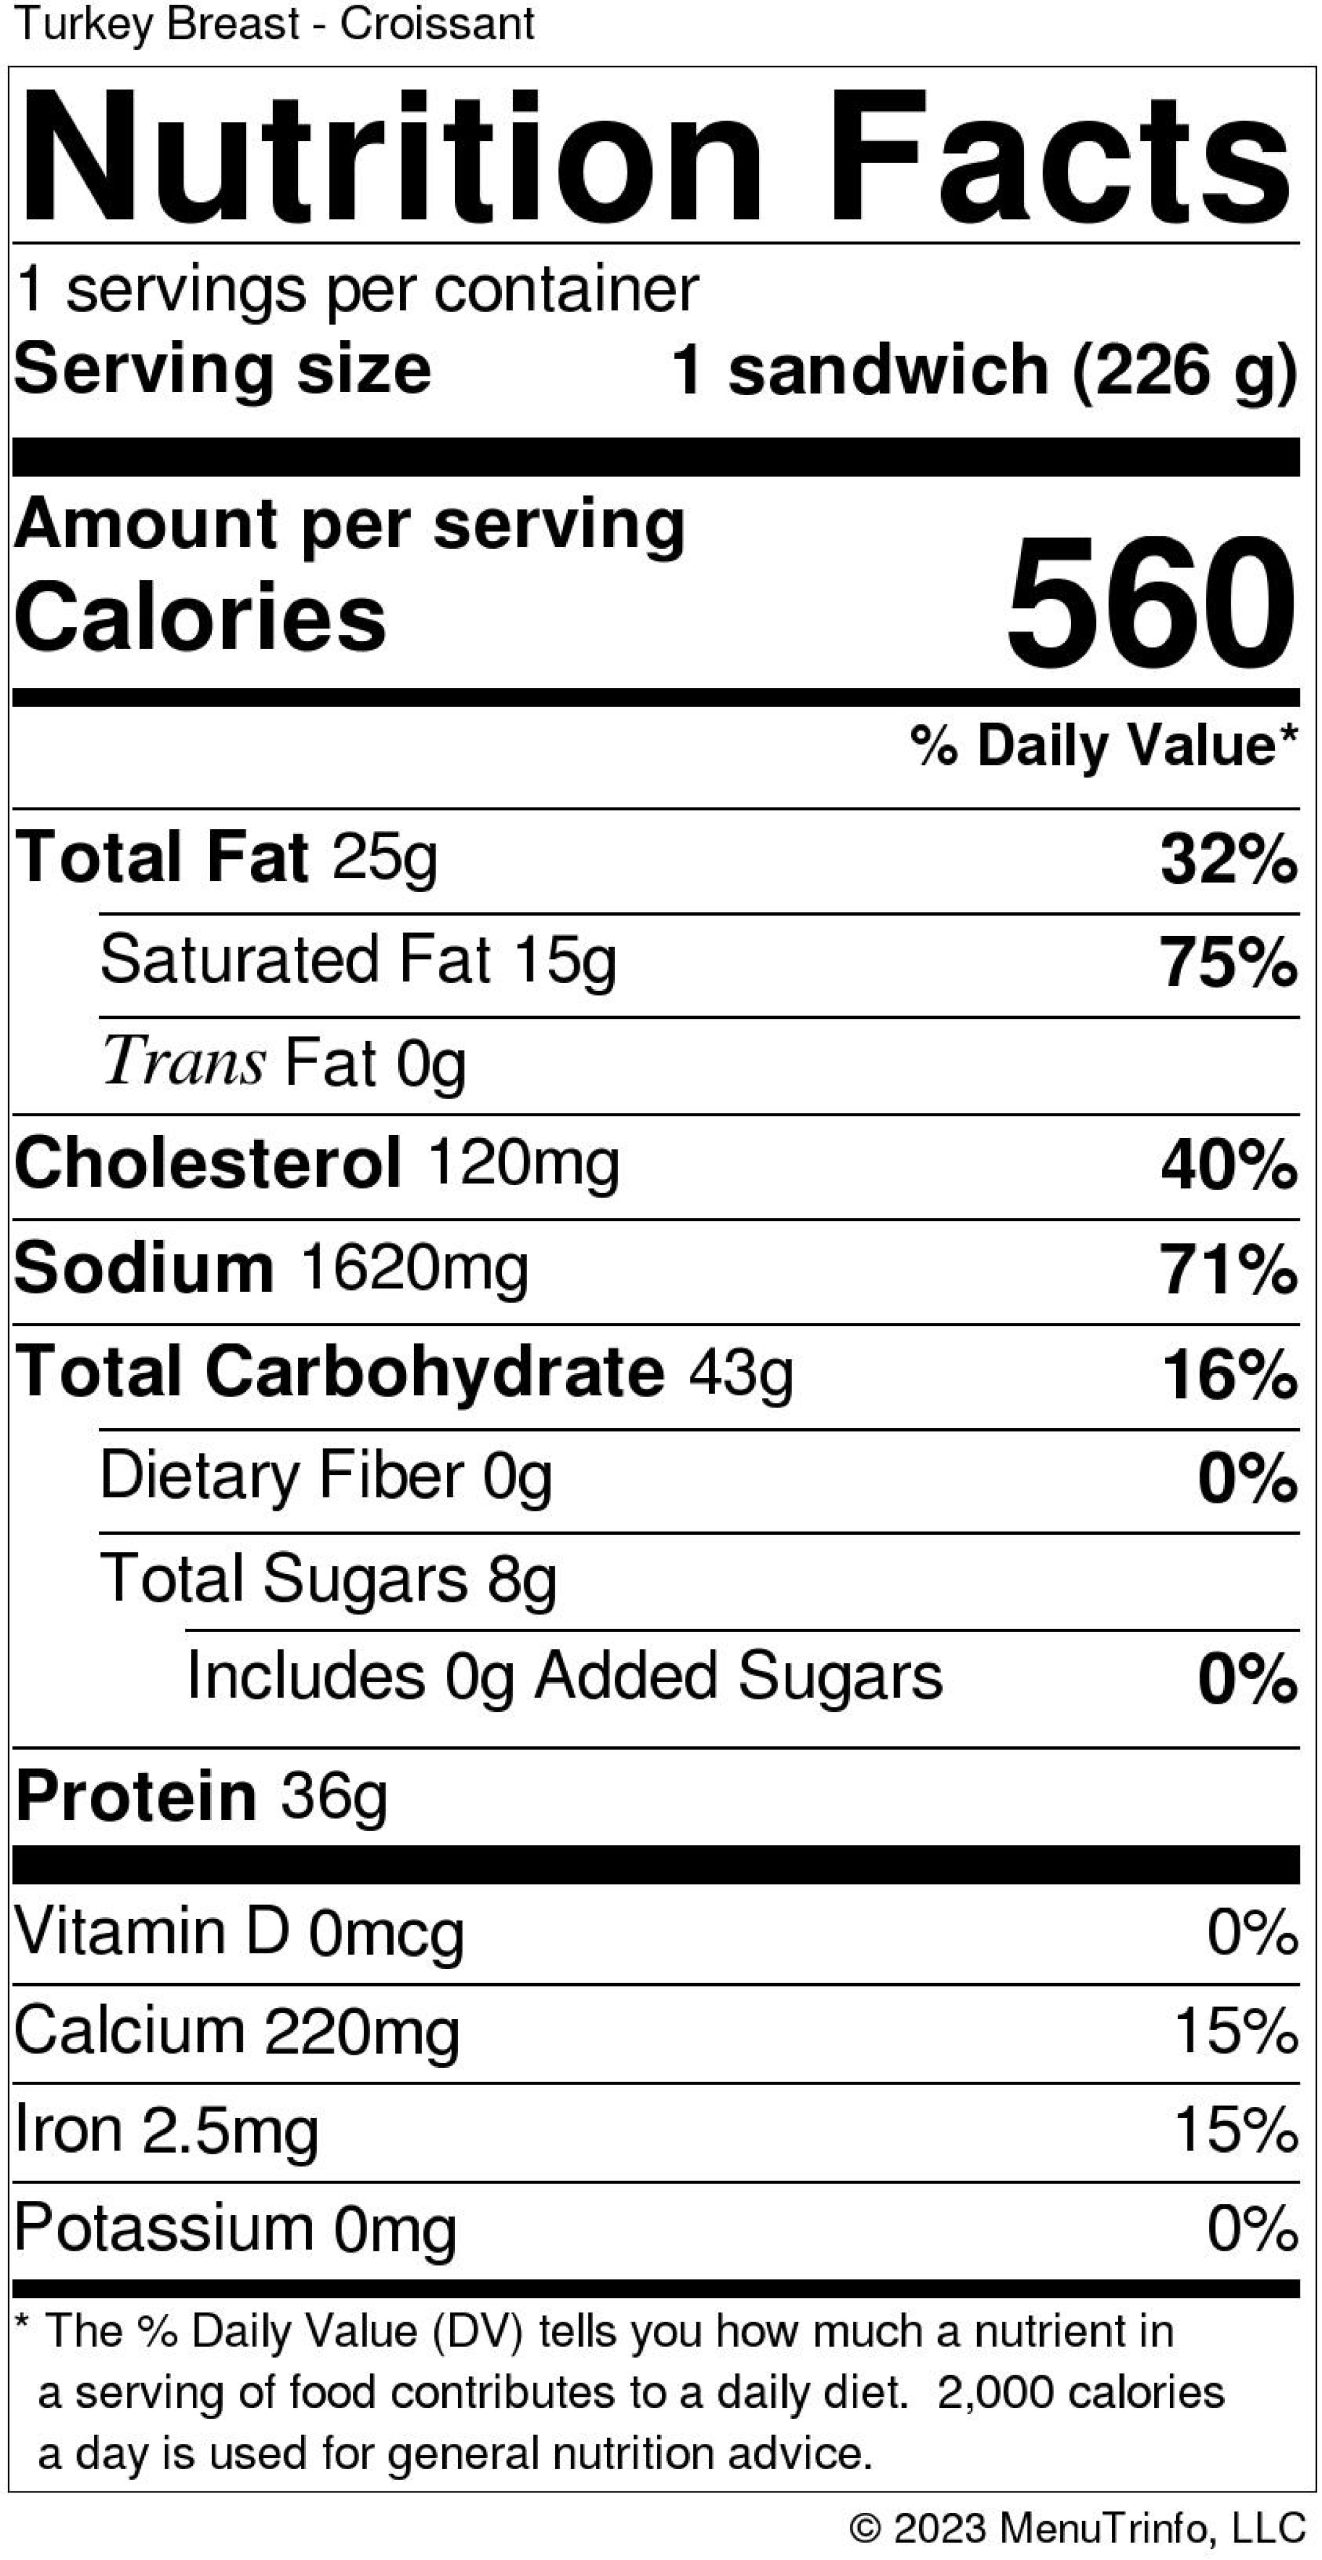 Nutrition Facts Panels